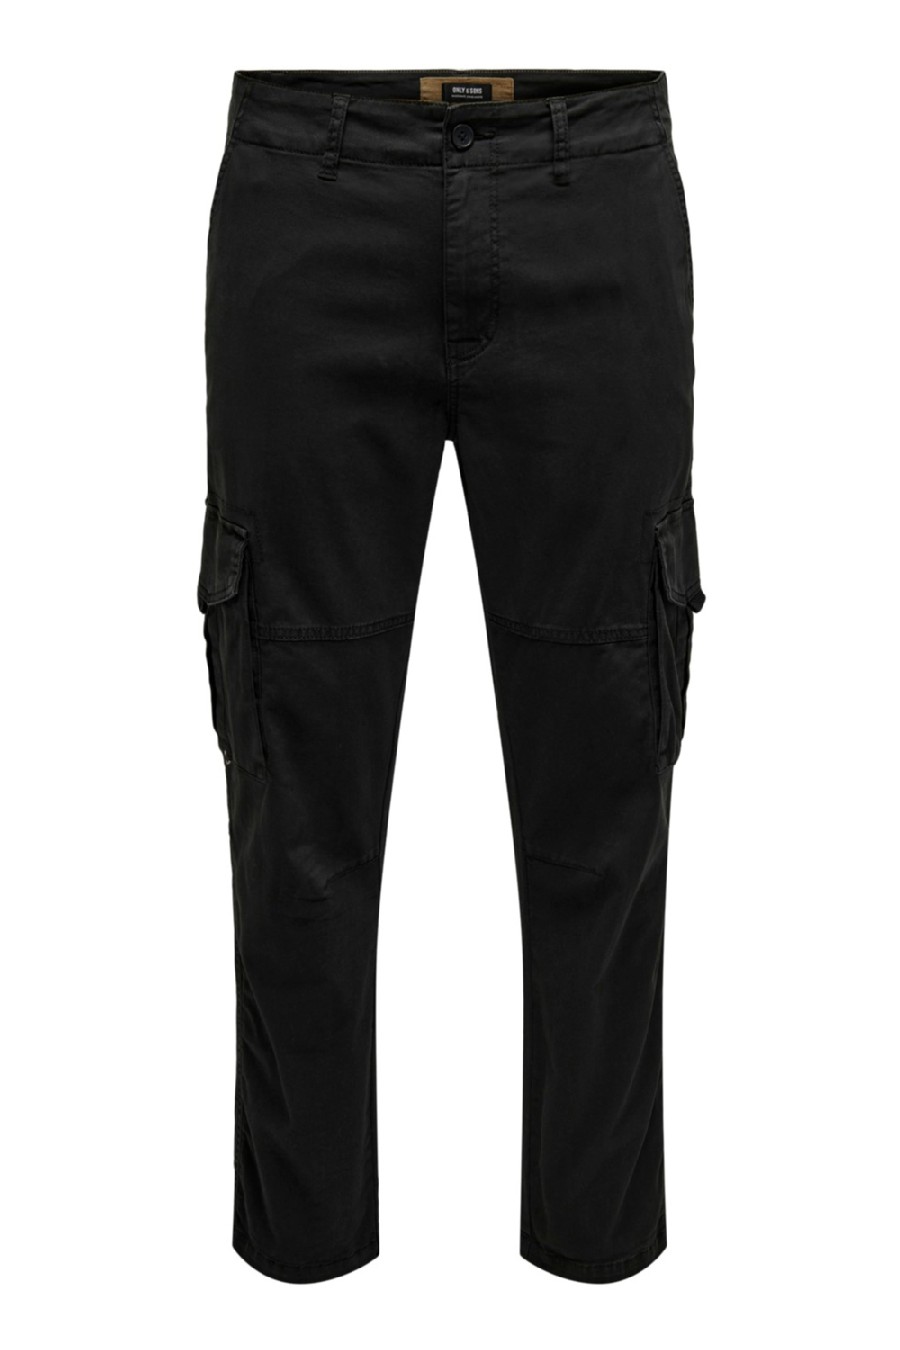 Housut ONLY & SONS 22025431-Black